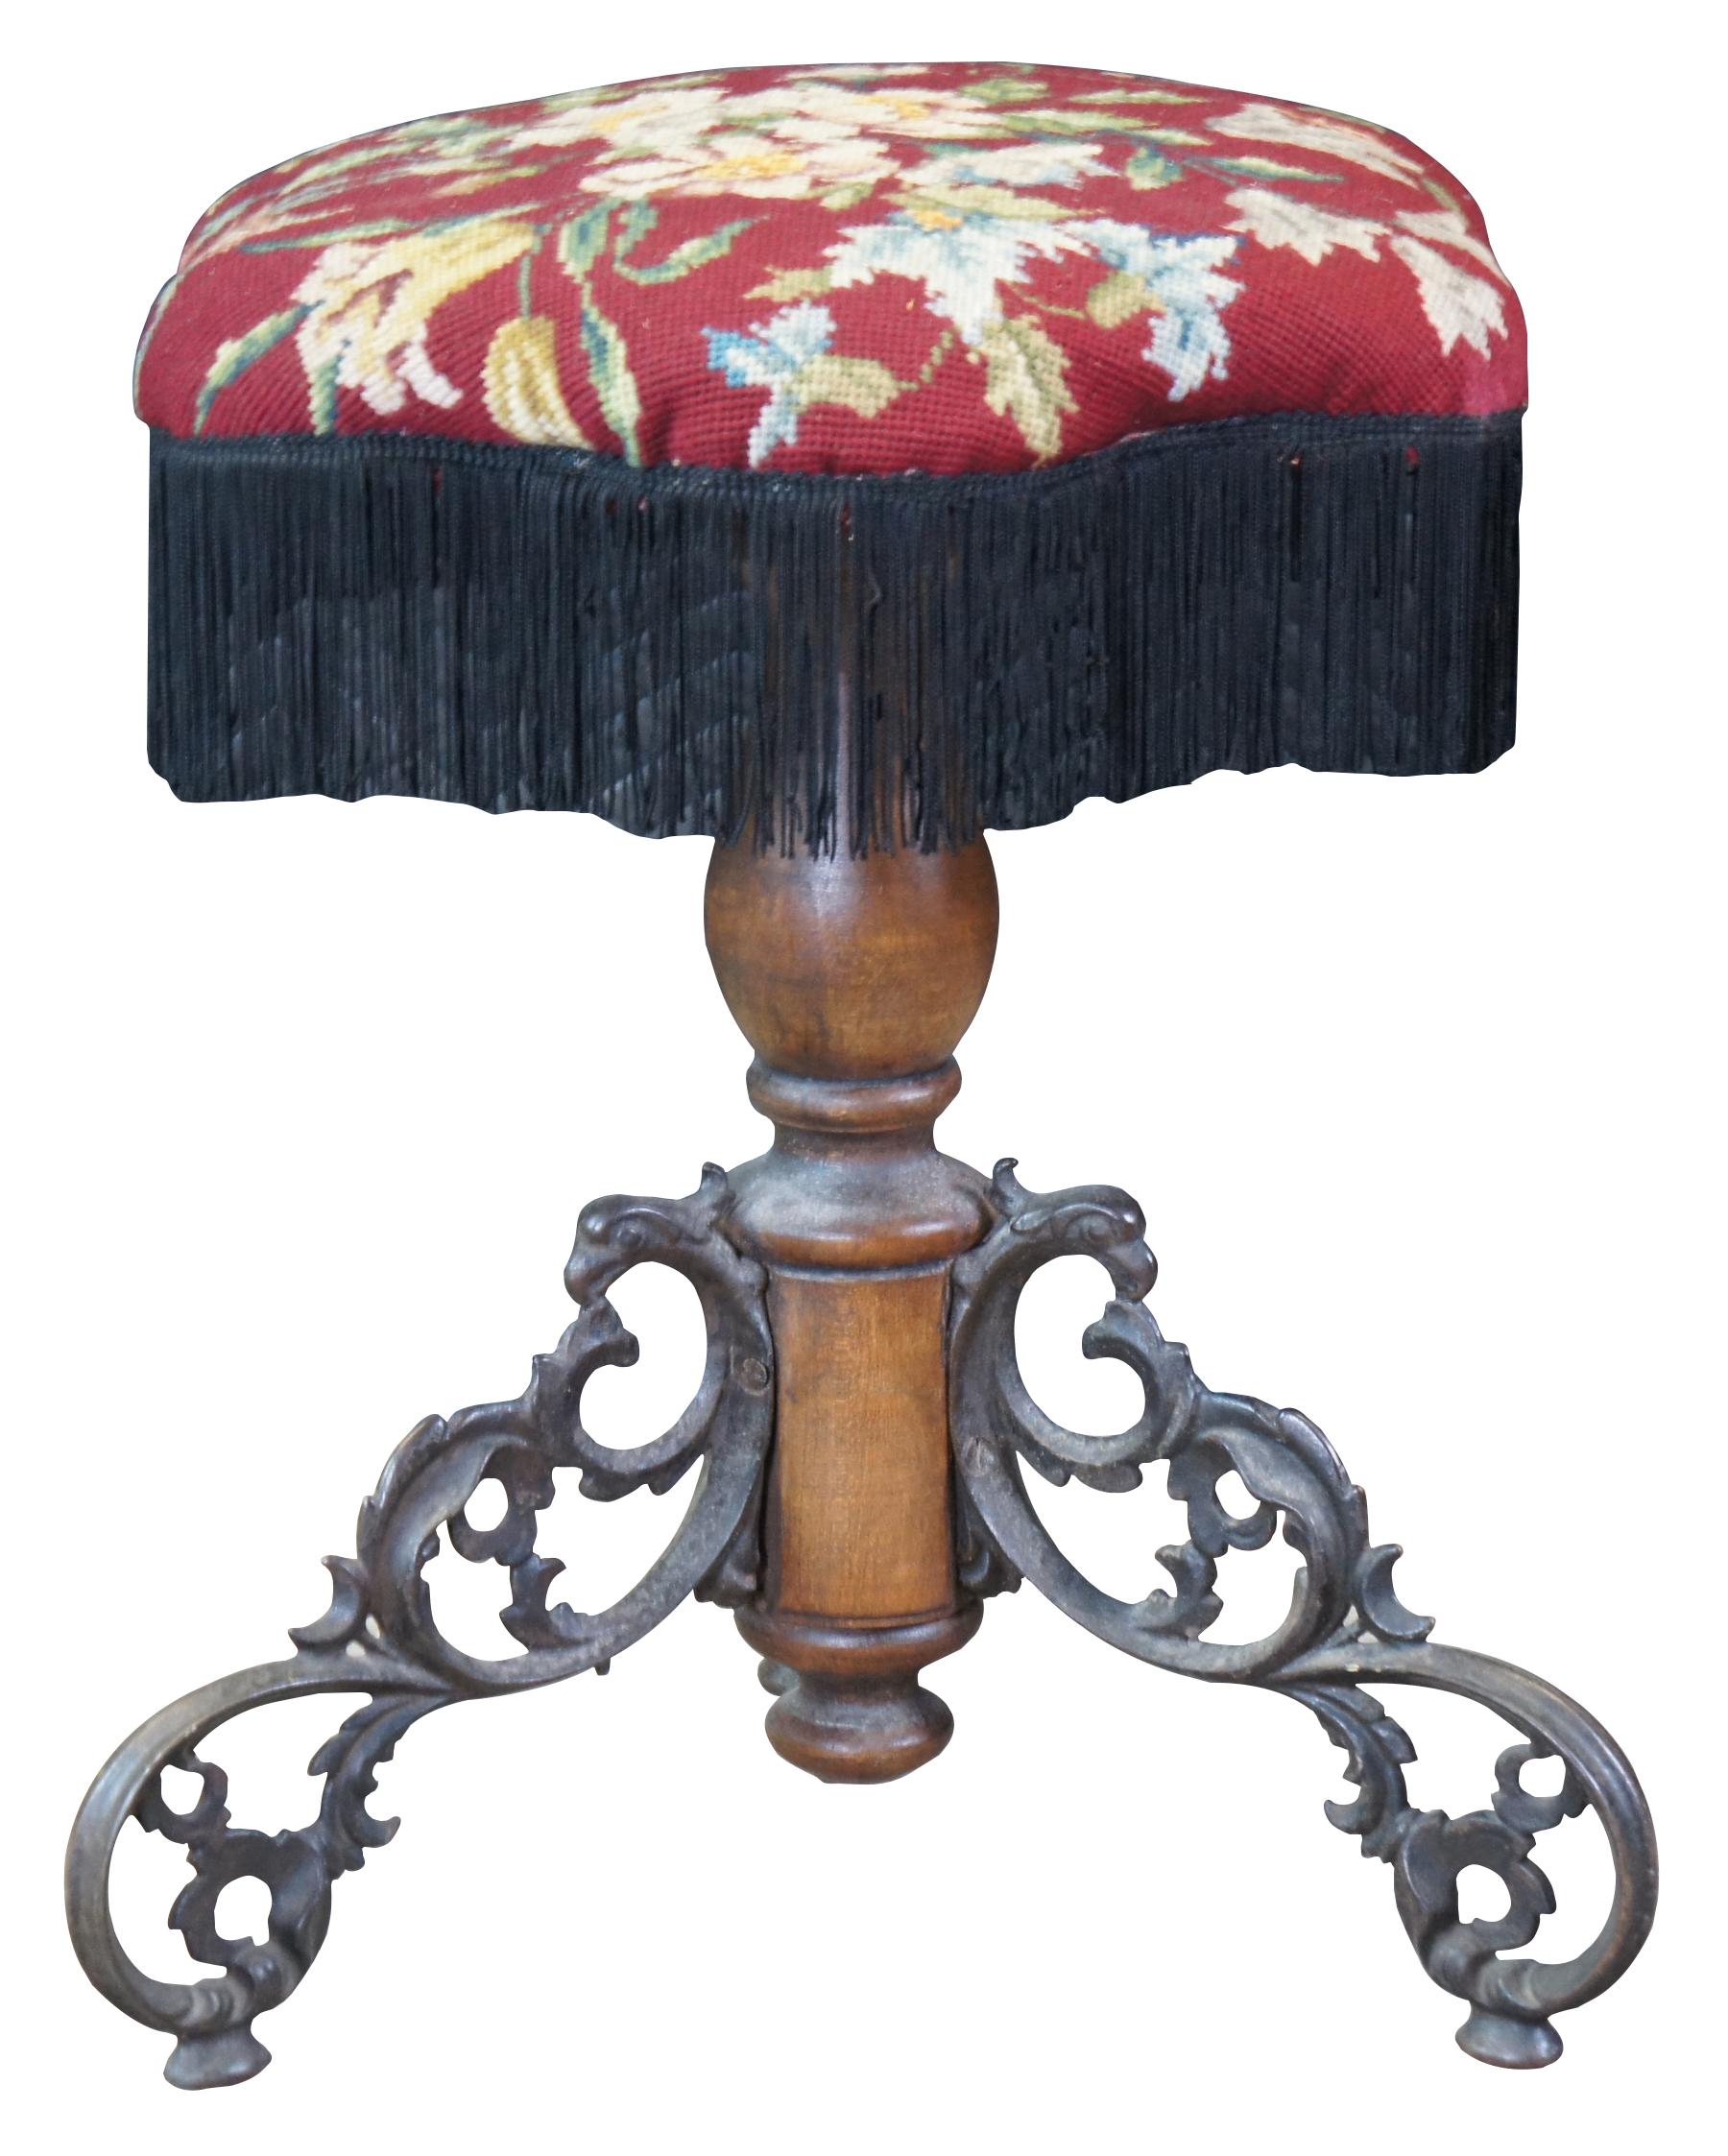 Antique 1880s adjustable piano stool featuring hexagon form with needlepoint & fringe seat, turned wood body and scrolled ornate tripod base with Phoenix / Griffon / Bird head accents.

Measures:17